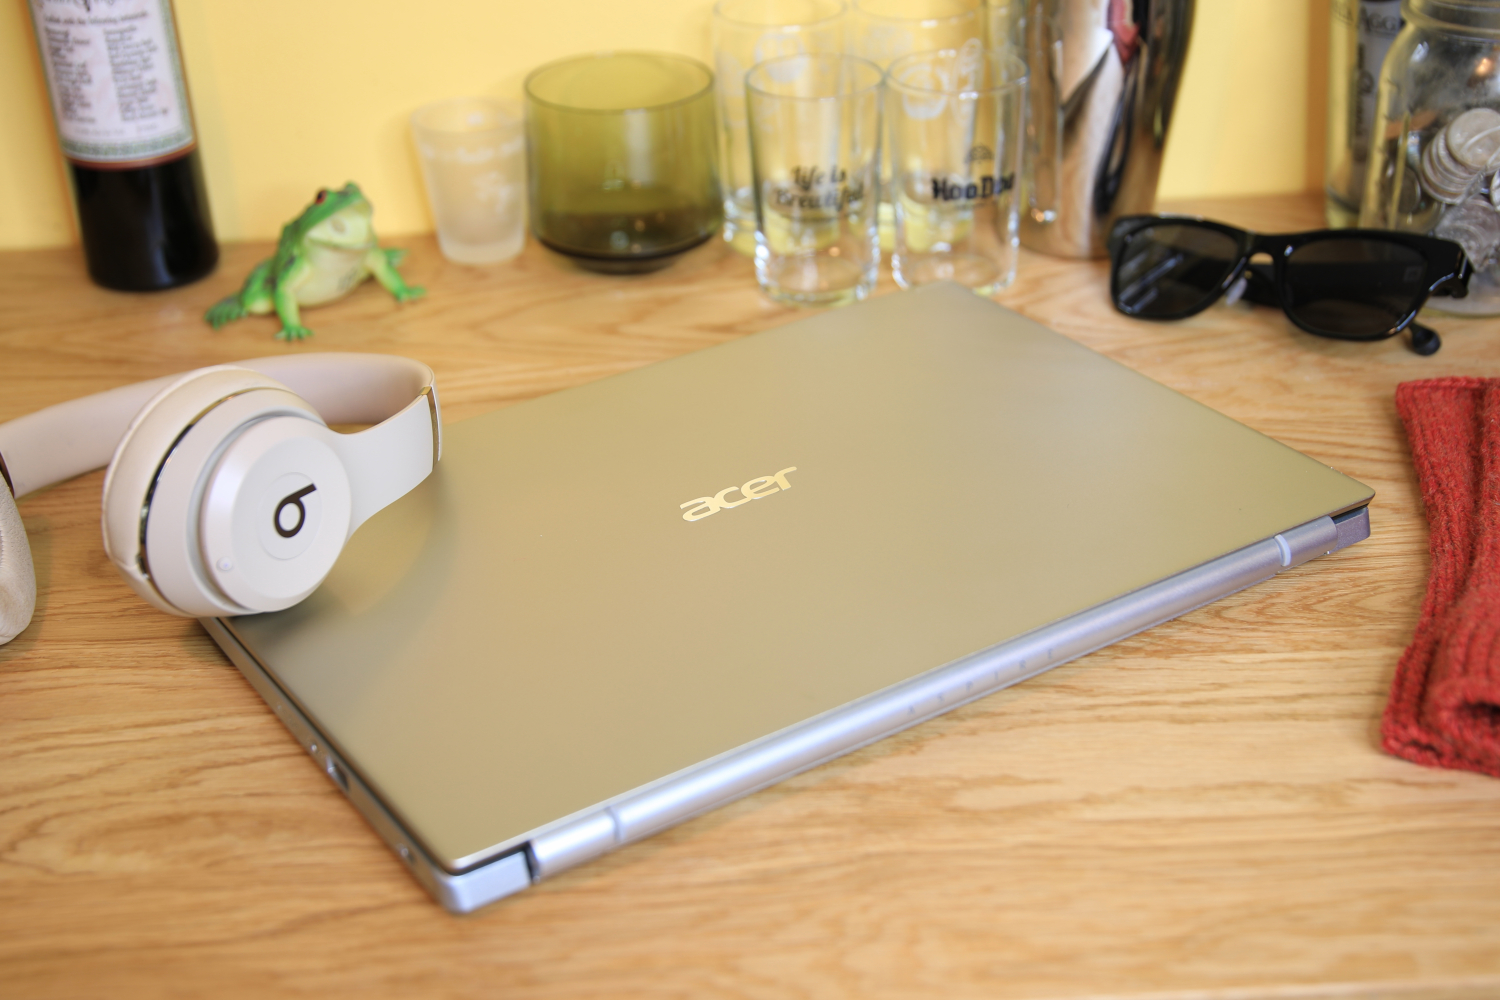 Acer Aspire 5 review: An affordable laptop that's enjoyable to use